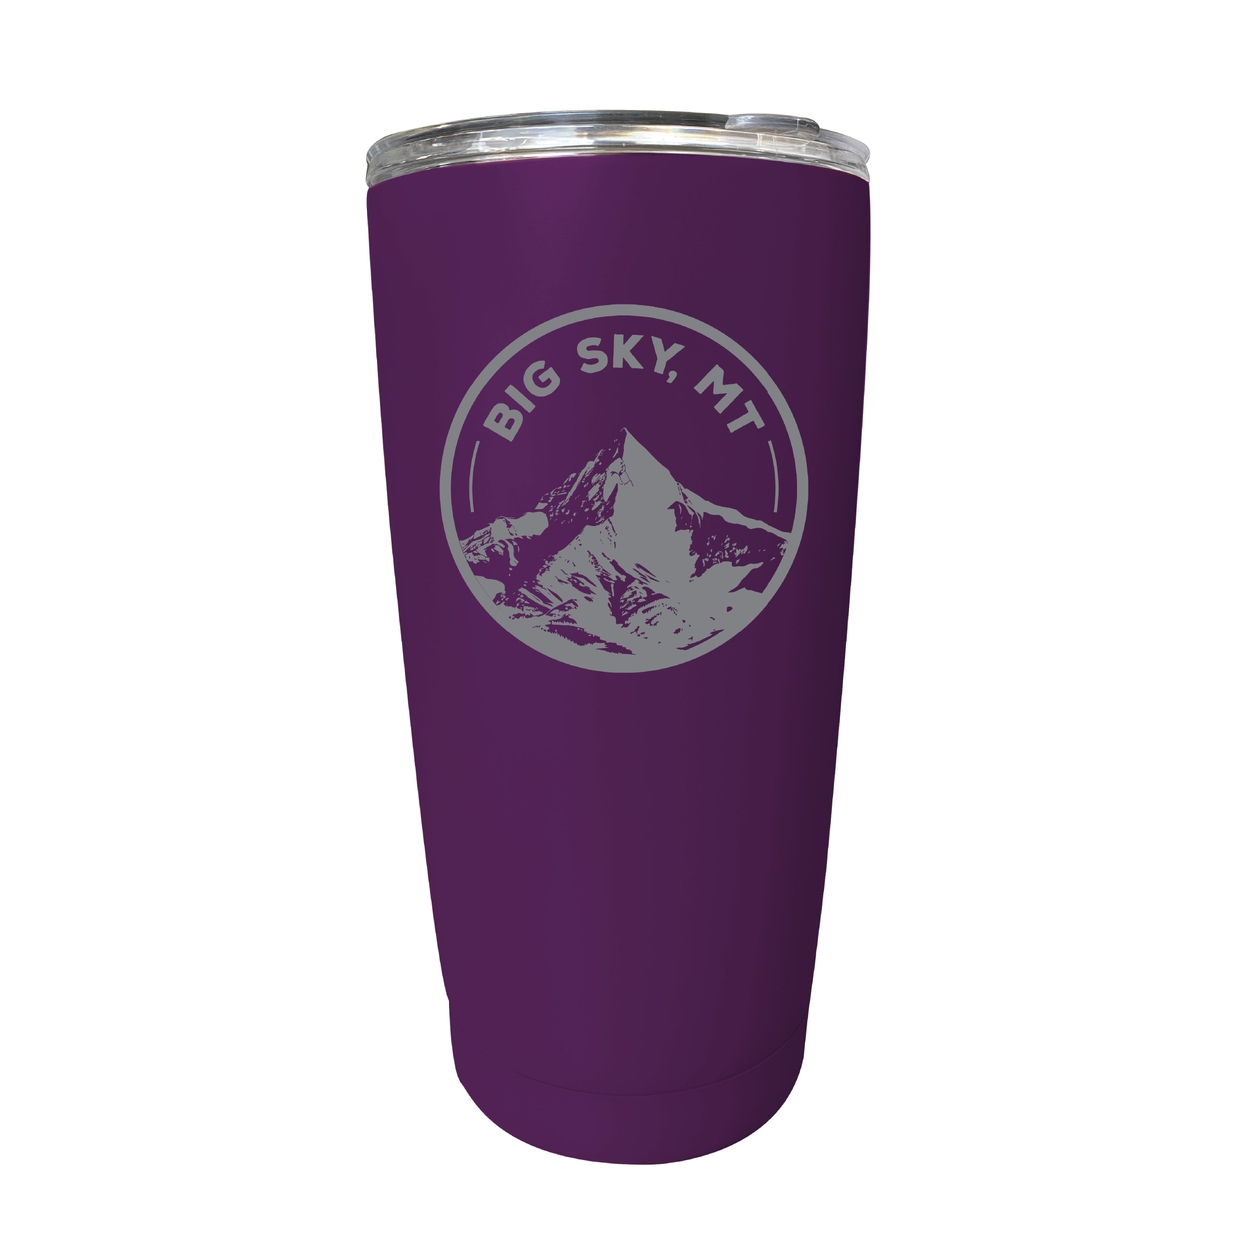 Big Sky Montana Souvenir 16 Oz Engraved Stainless Steel Insulated Tumbler - Gray,,4-Pack